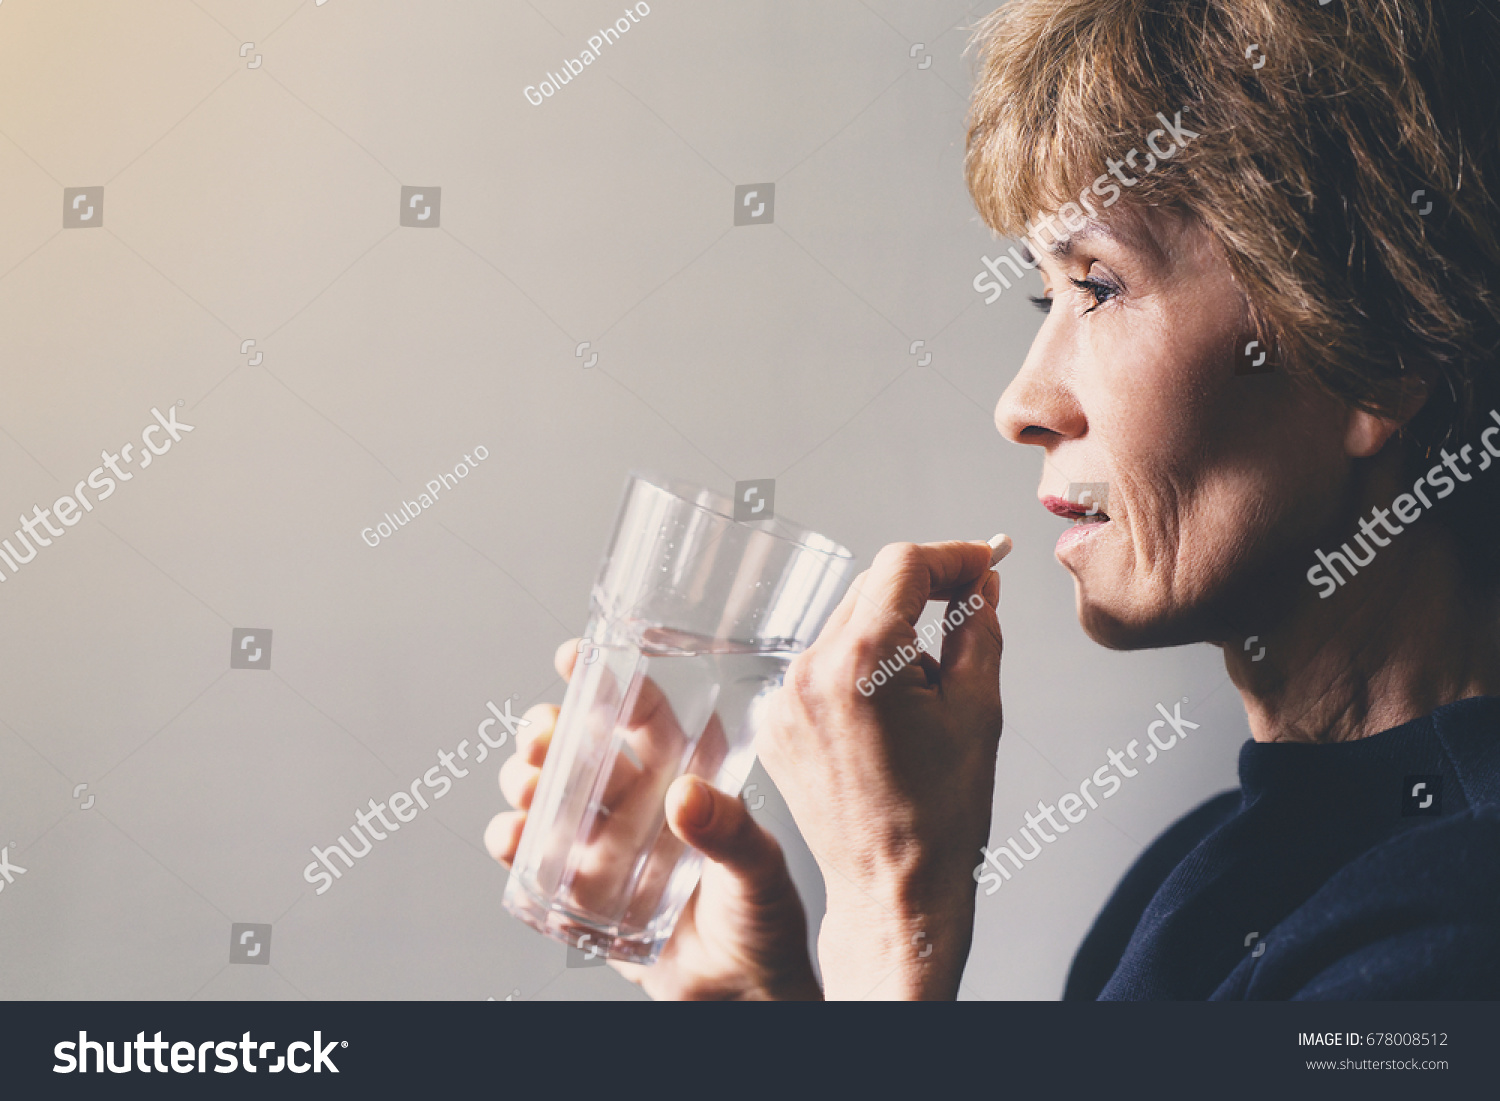 Adult woman with a pill and a glass of water / healthcare concept #678008512